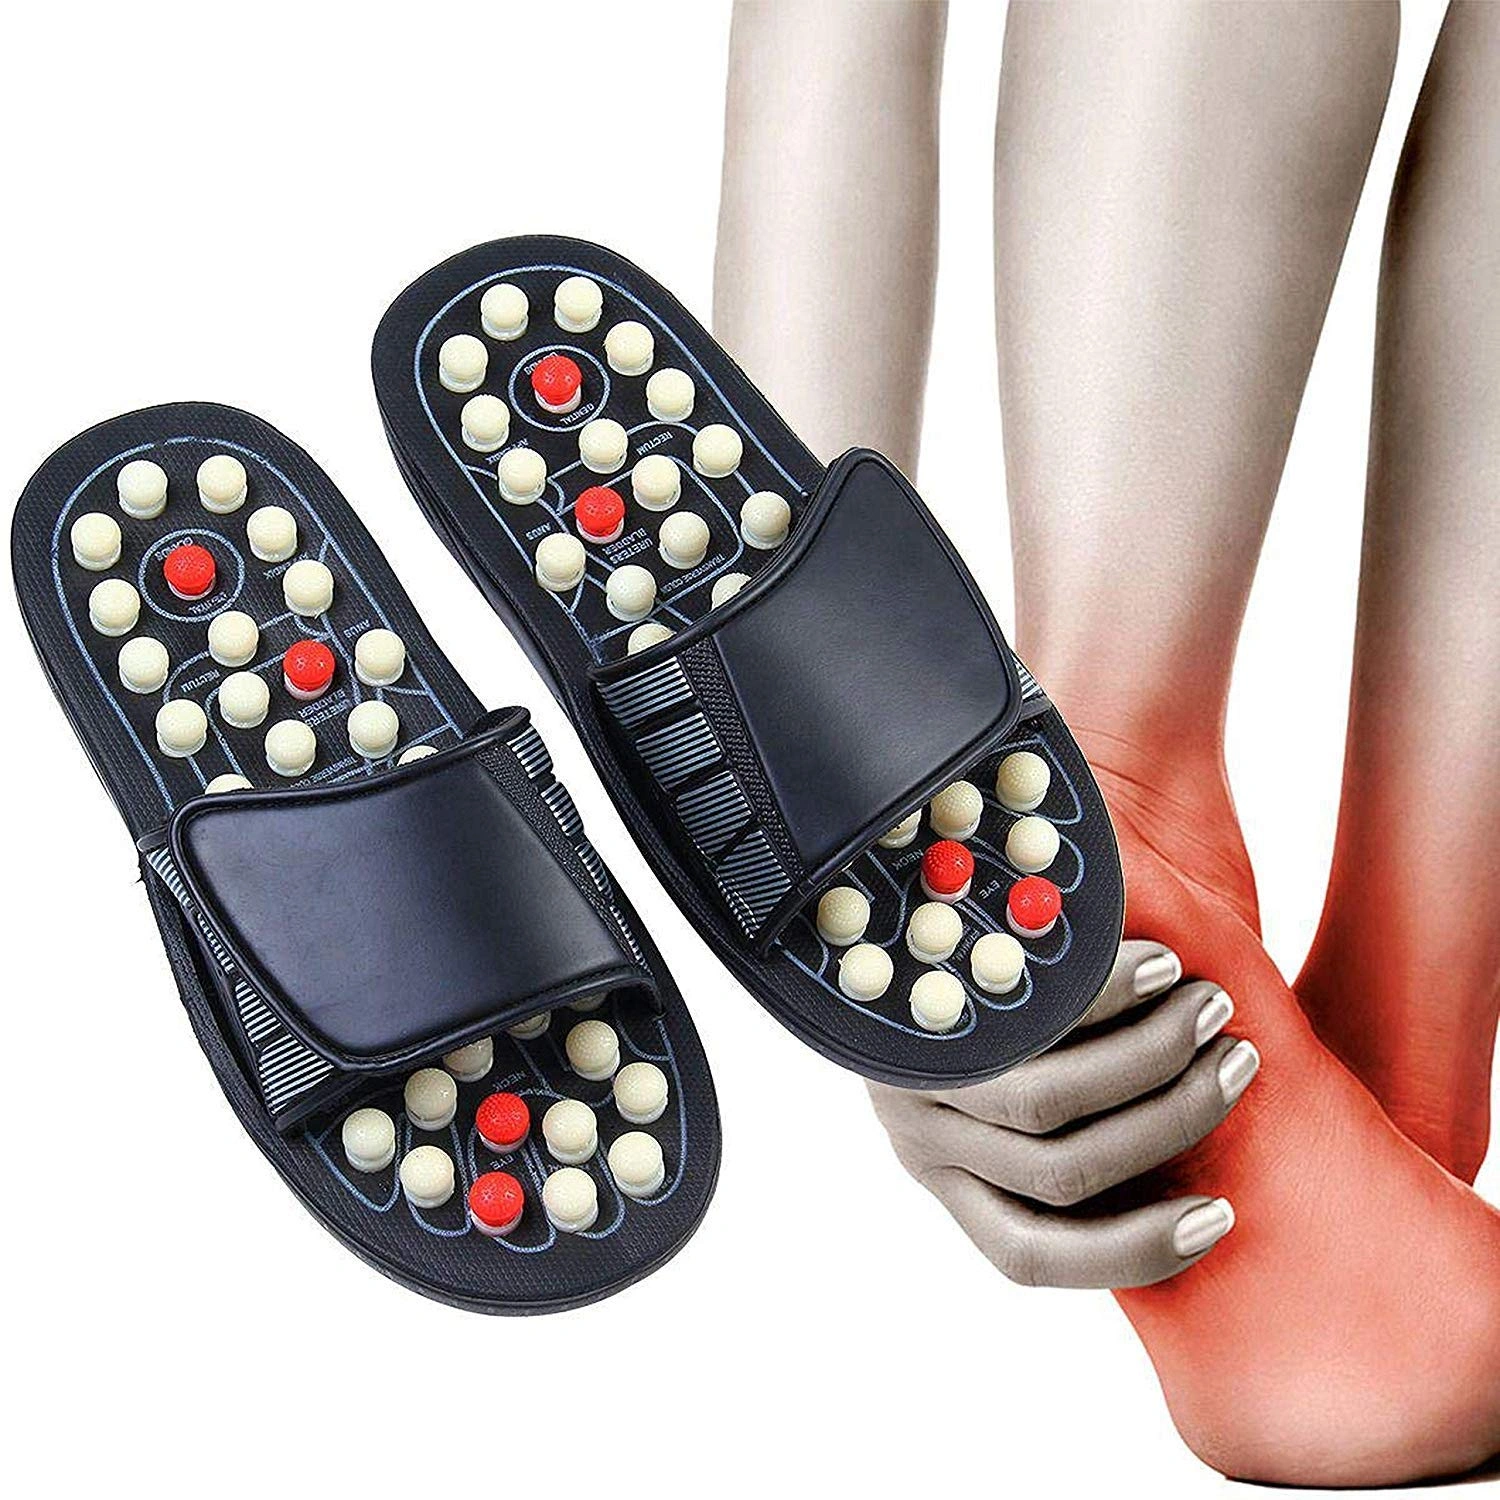 Buy Acupressure India Health Care Blue Slippers Online at Lowest Price Ever  in India | Check Reviews & Ratings - Shop The World